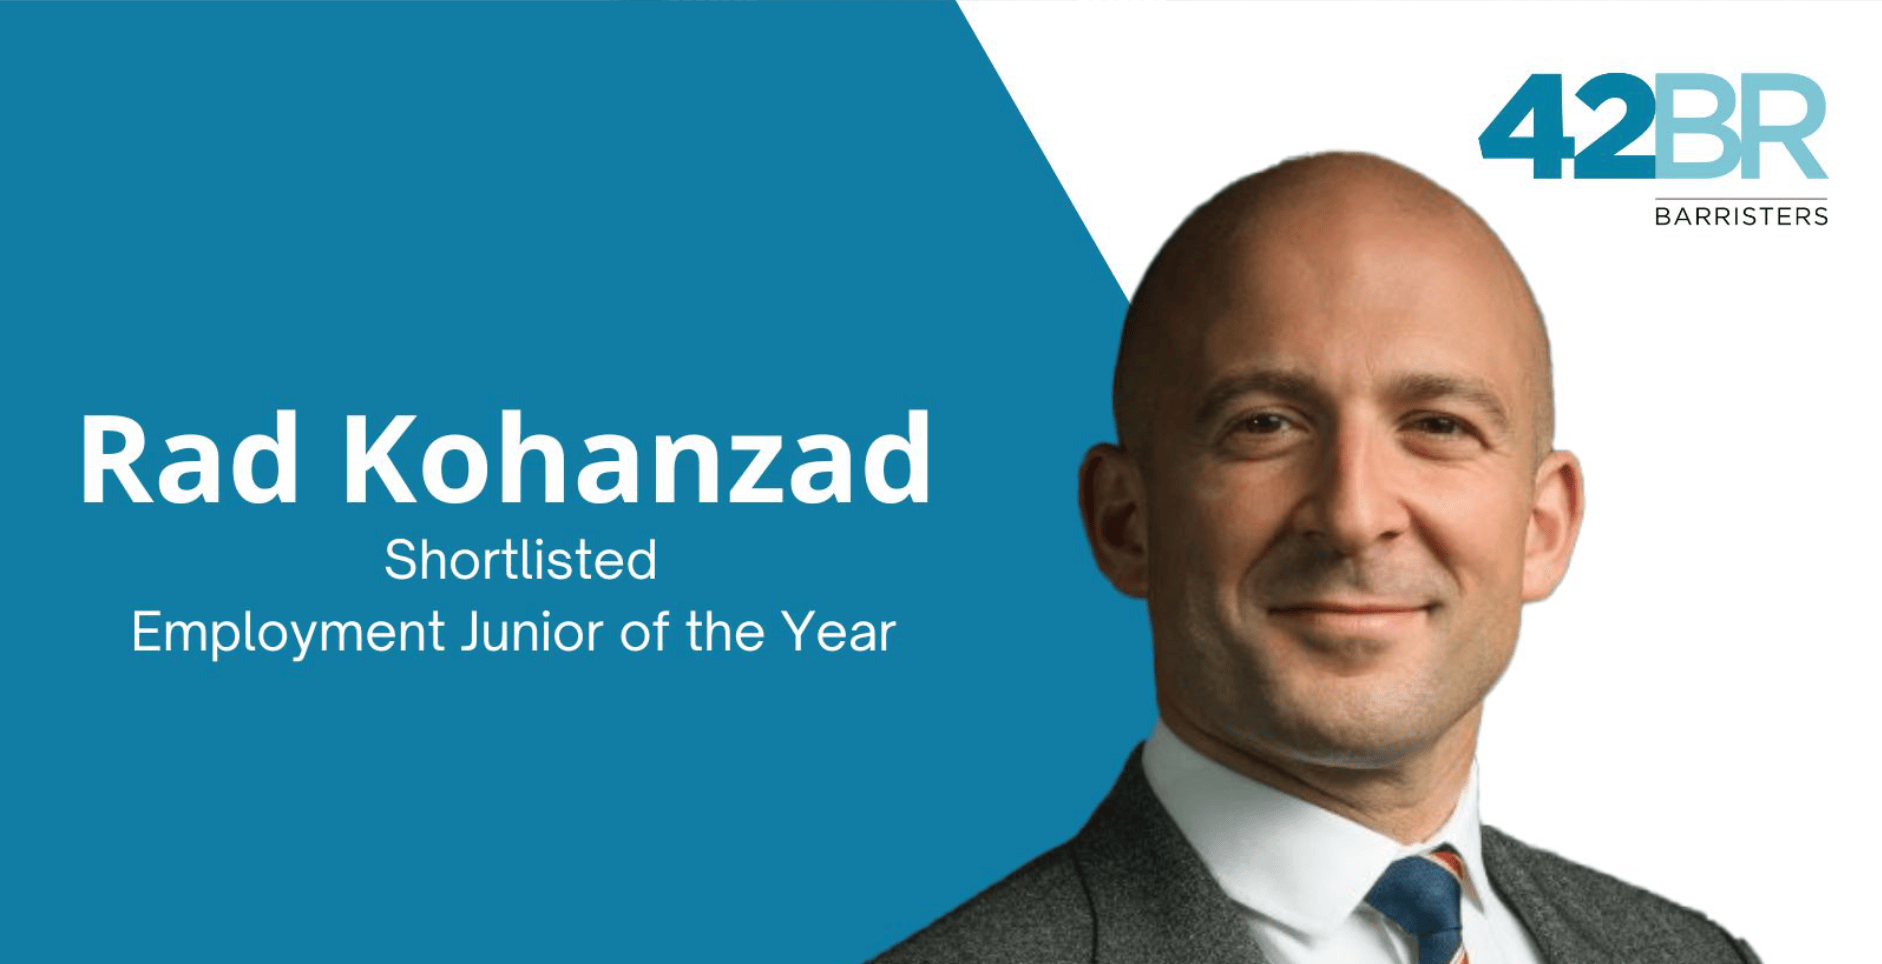 Rad Kohanzad shortlisted for Employment Junior of the Year